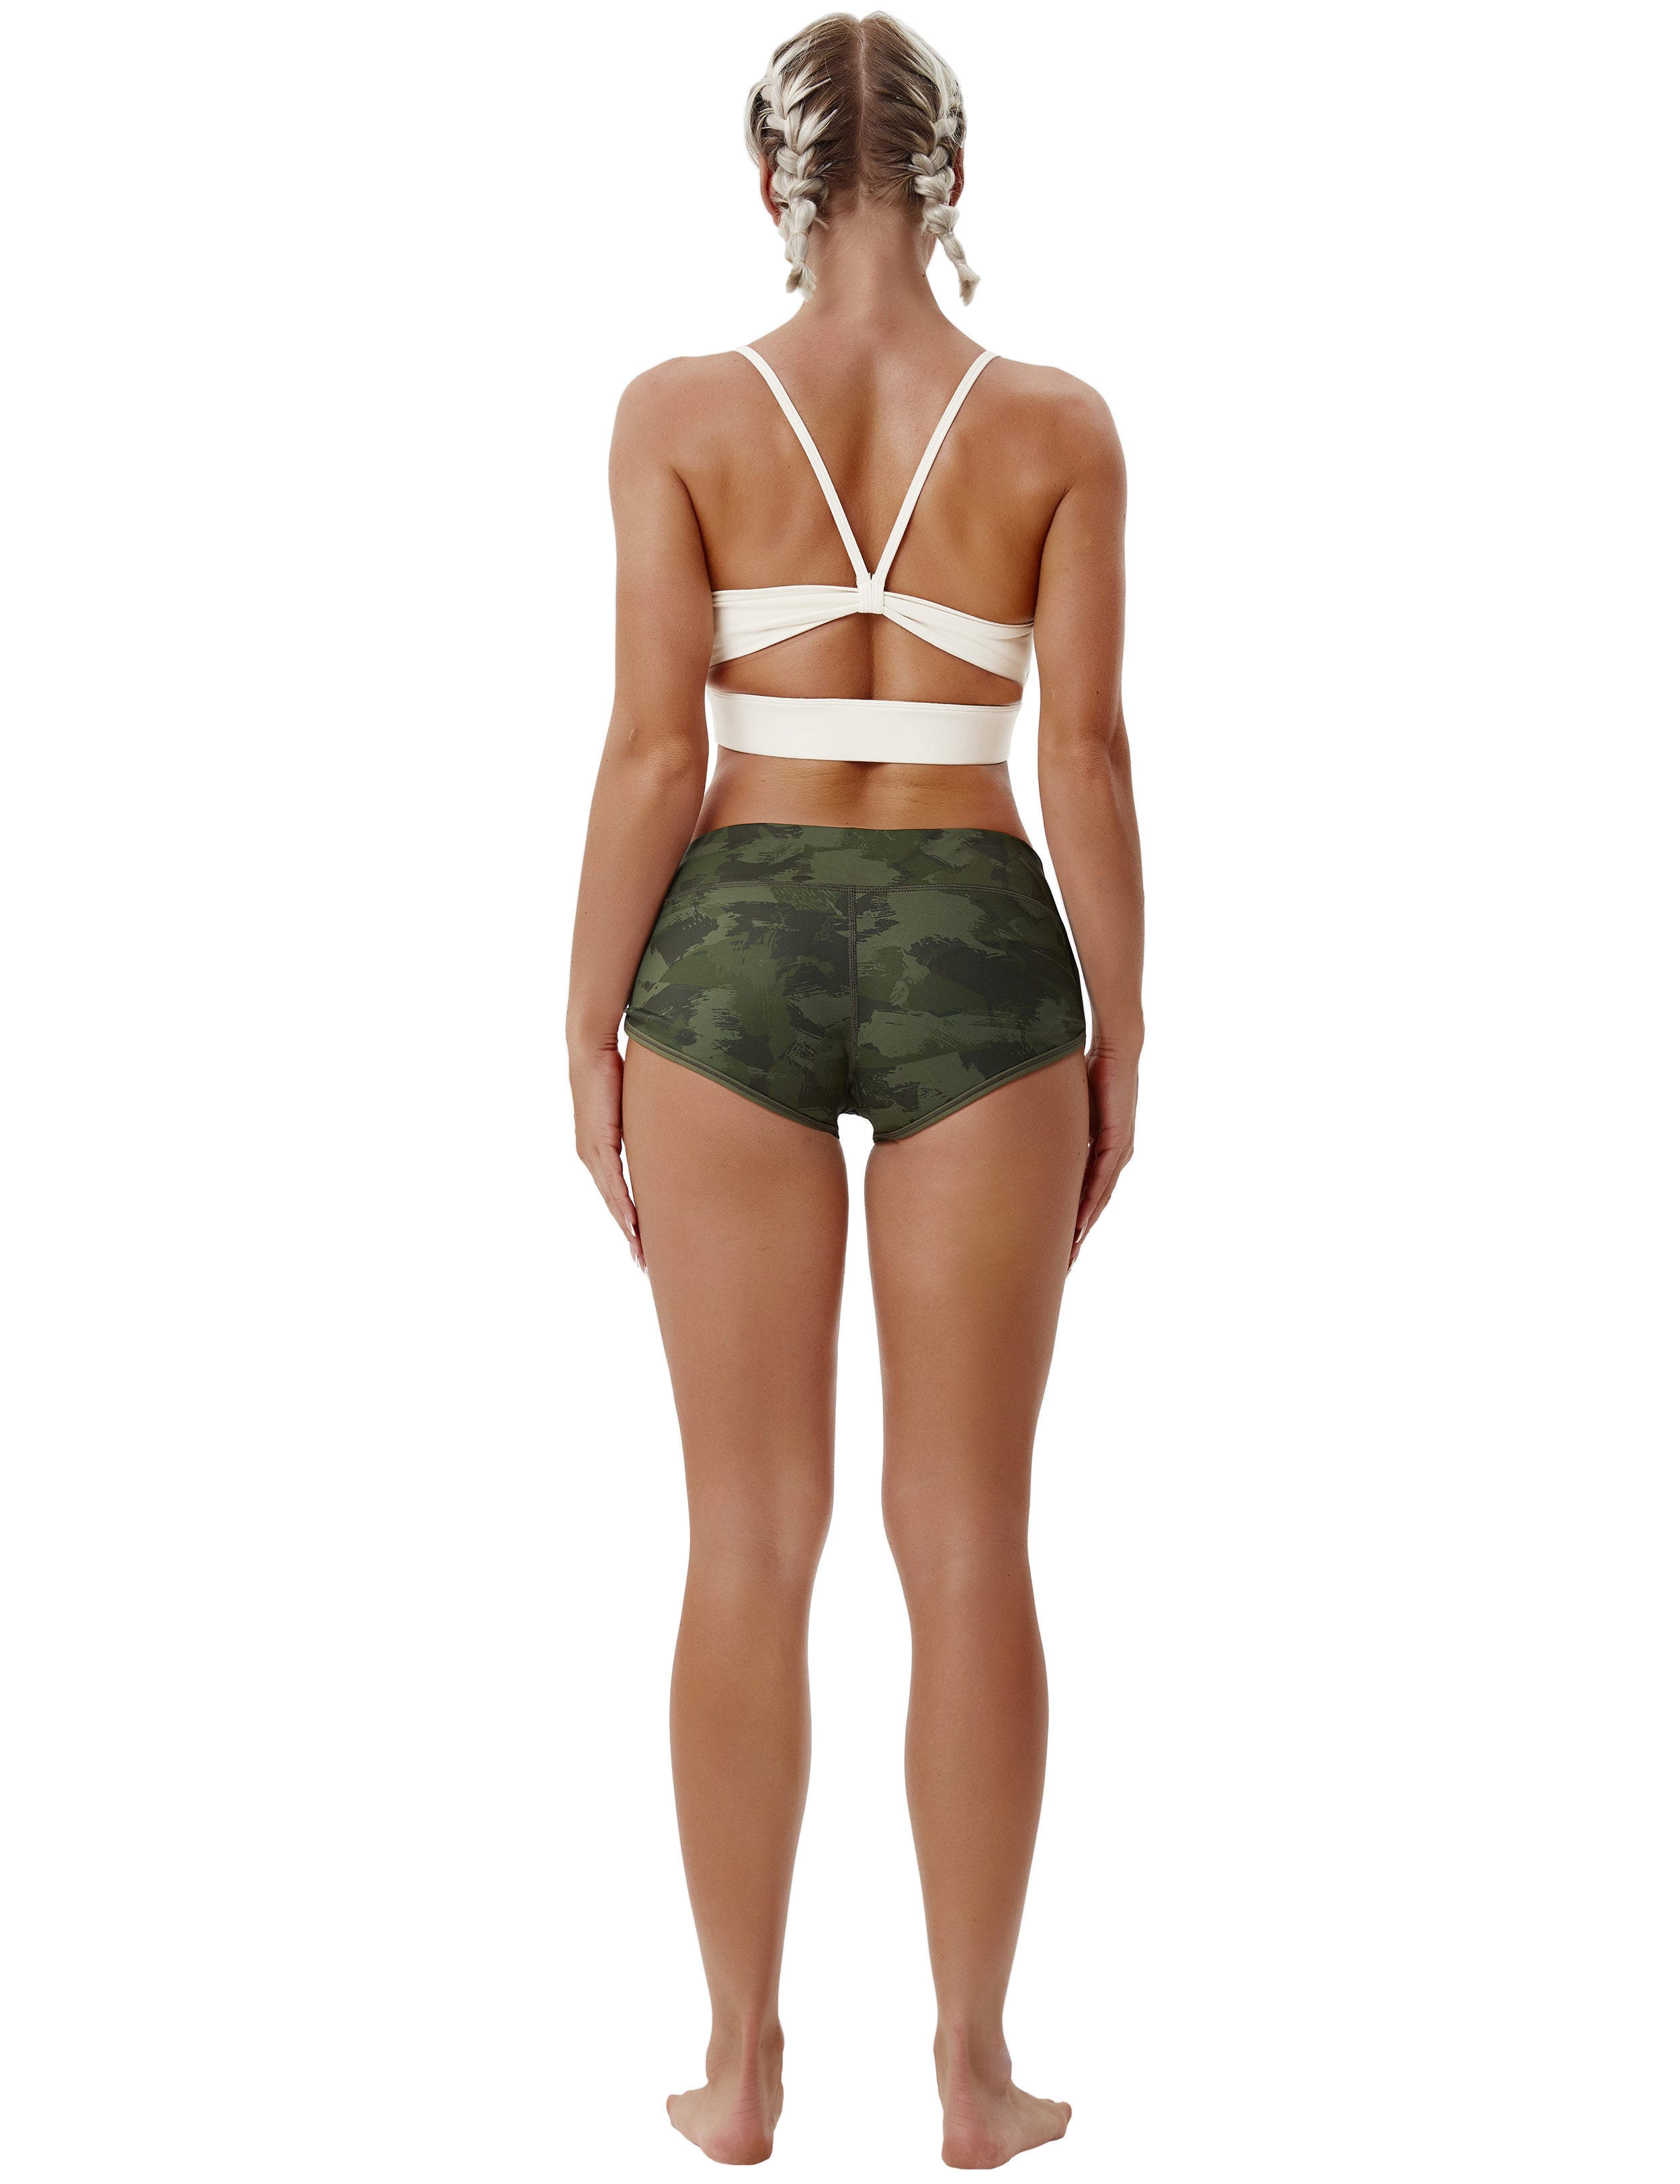 Printed Booty Biking Shorts green brushcamo Sleek, soft, smooth and totally comfortable: our newest sexy style is here. Softest-ever fabric High elasticity High density 4-way stretch Fabric doesn't attract lint easily No see-through Moisture-wicking Machine wash 78% Polyester, 22% Spandex